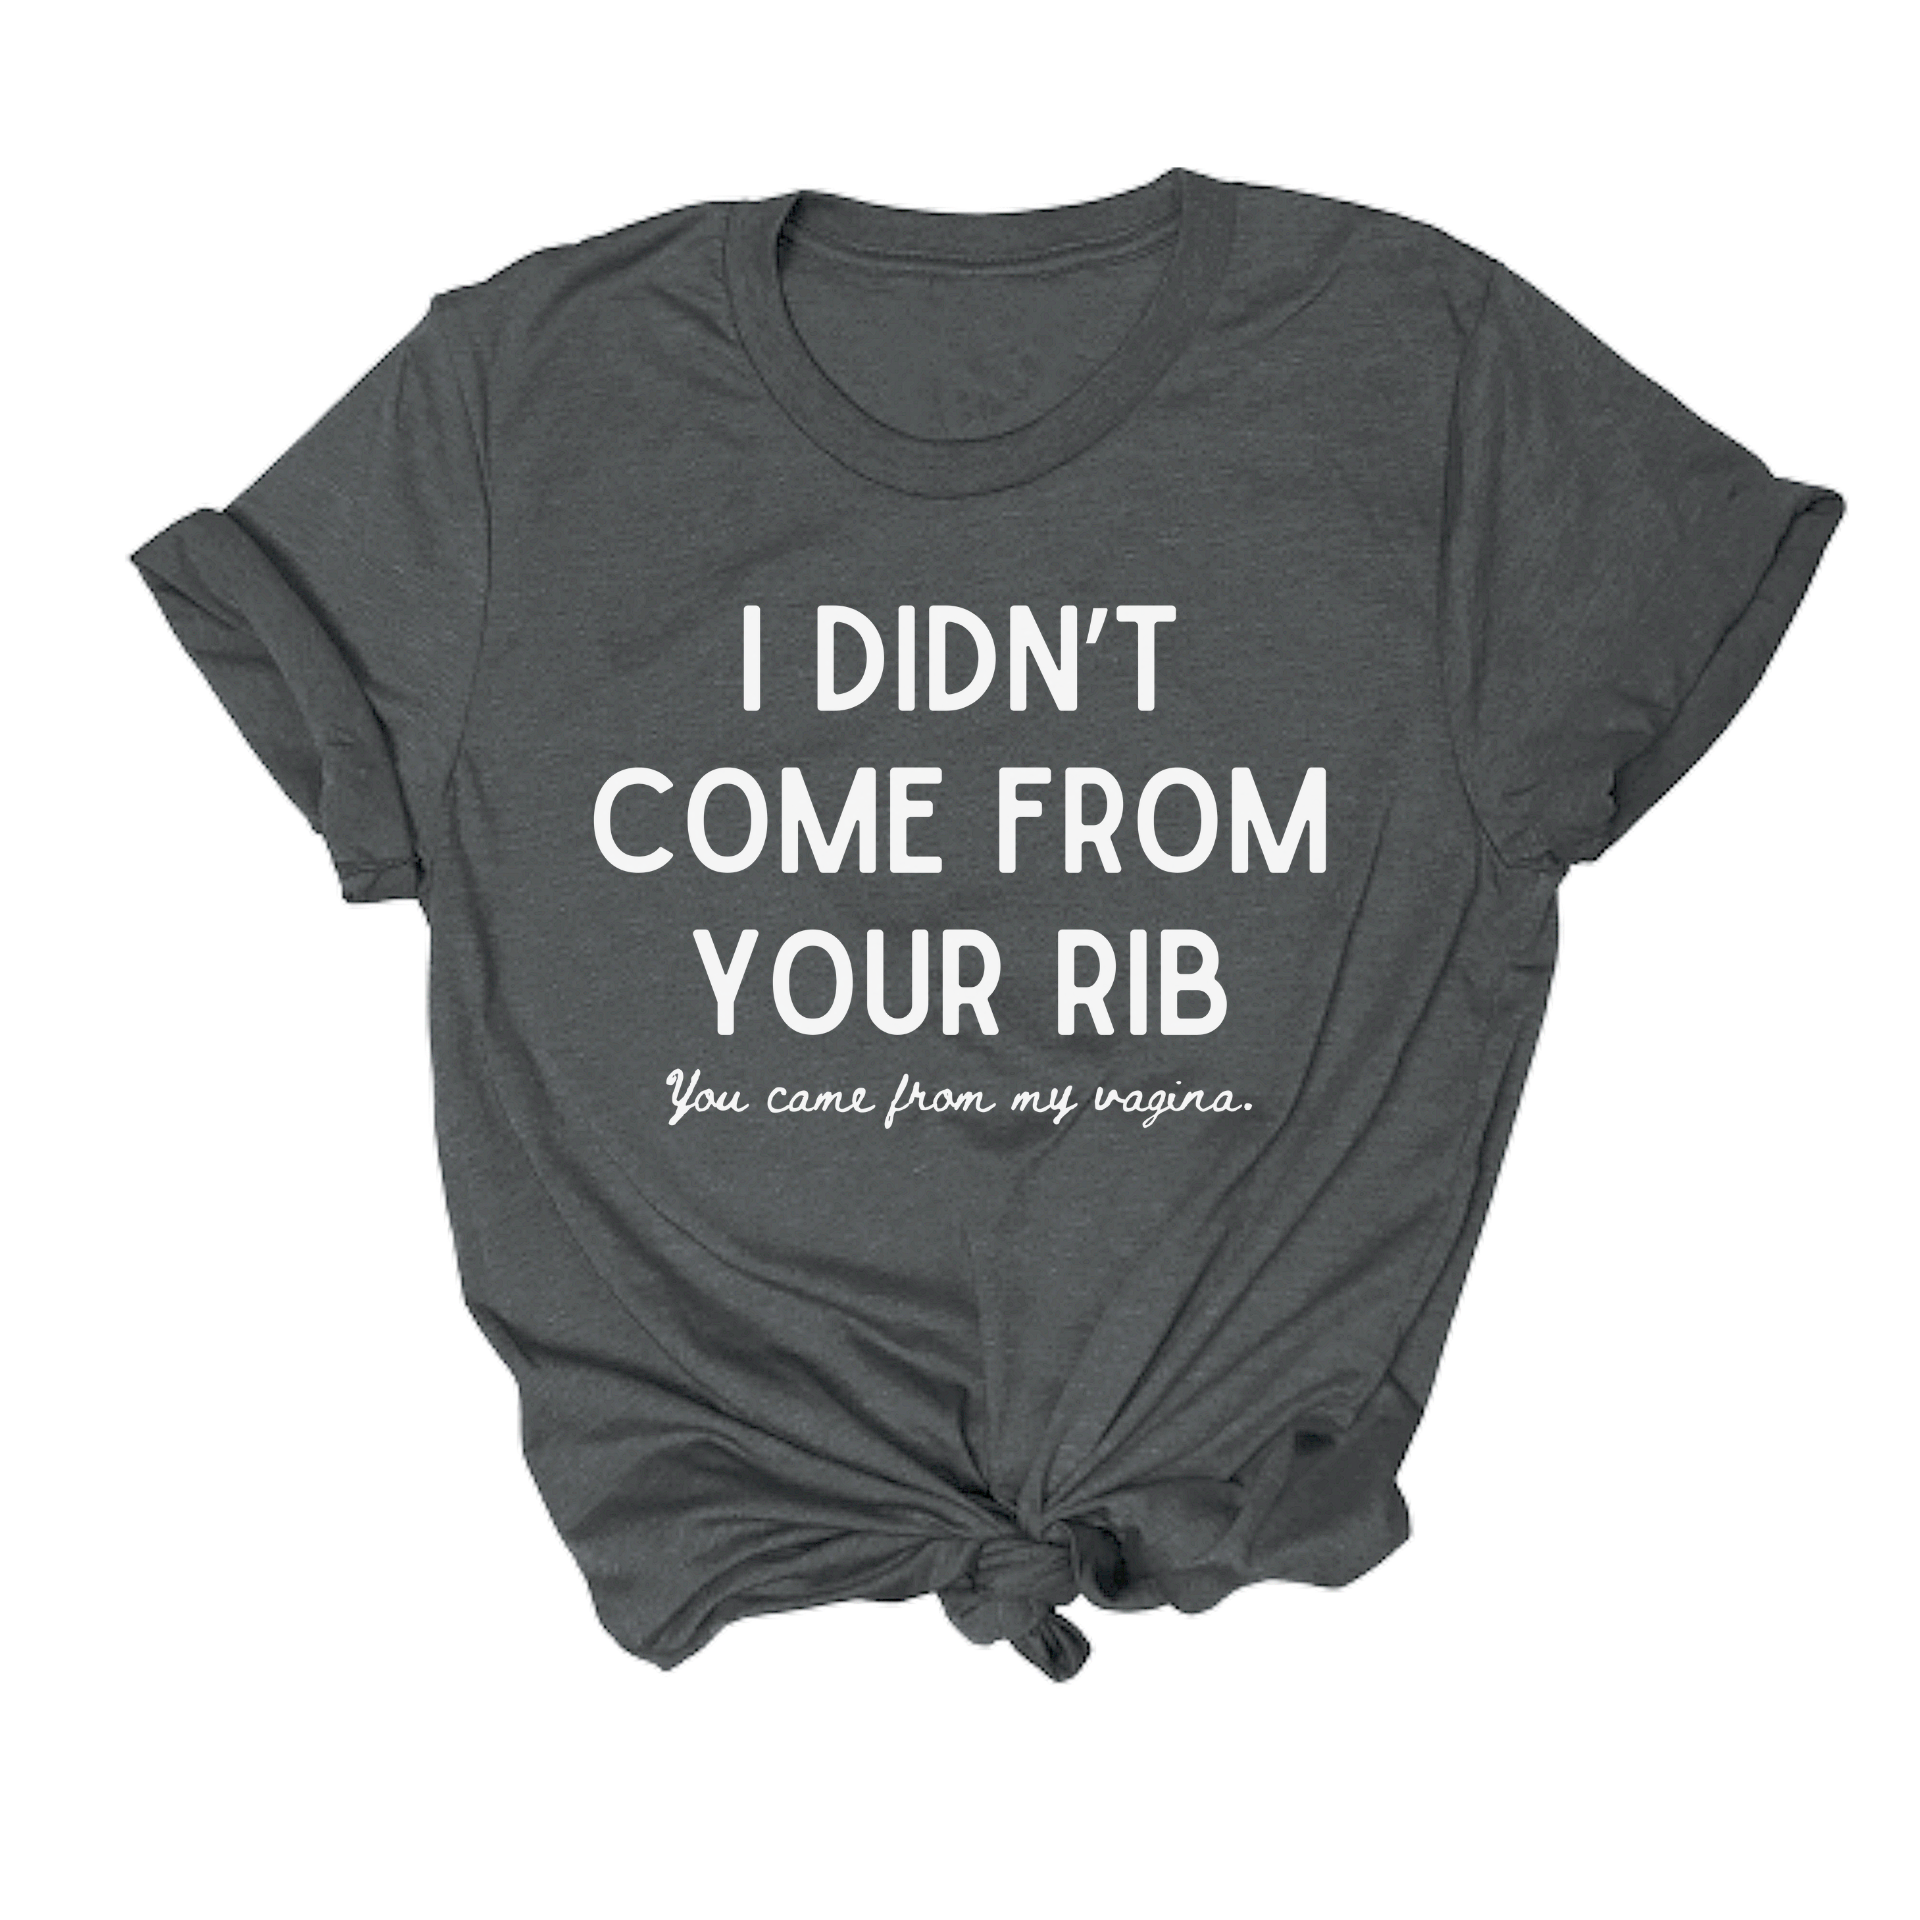 Feminist themed t shirt that says "I didn't come from your rib you came from my vagina."